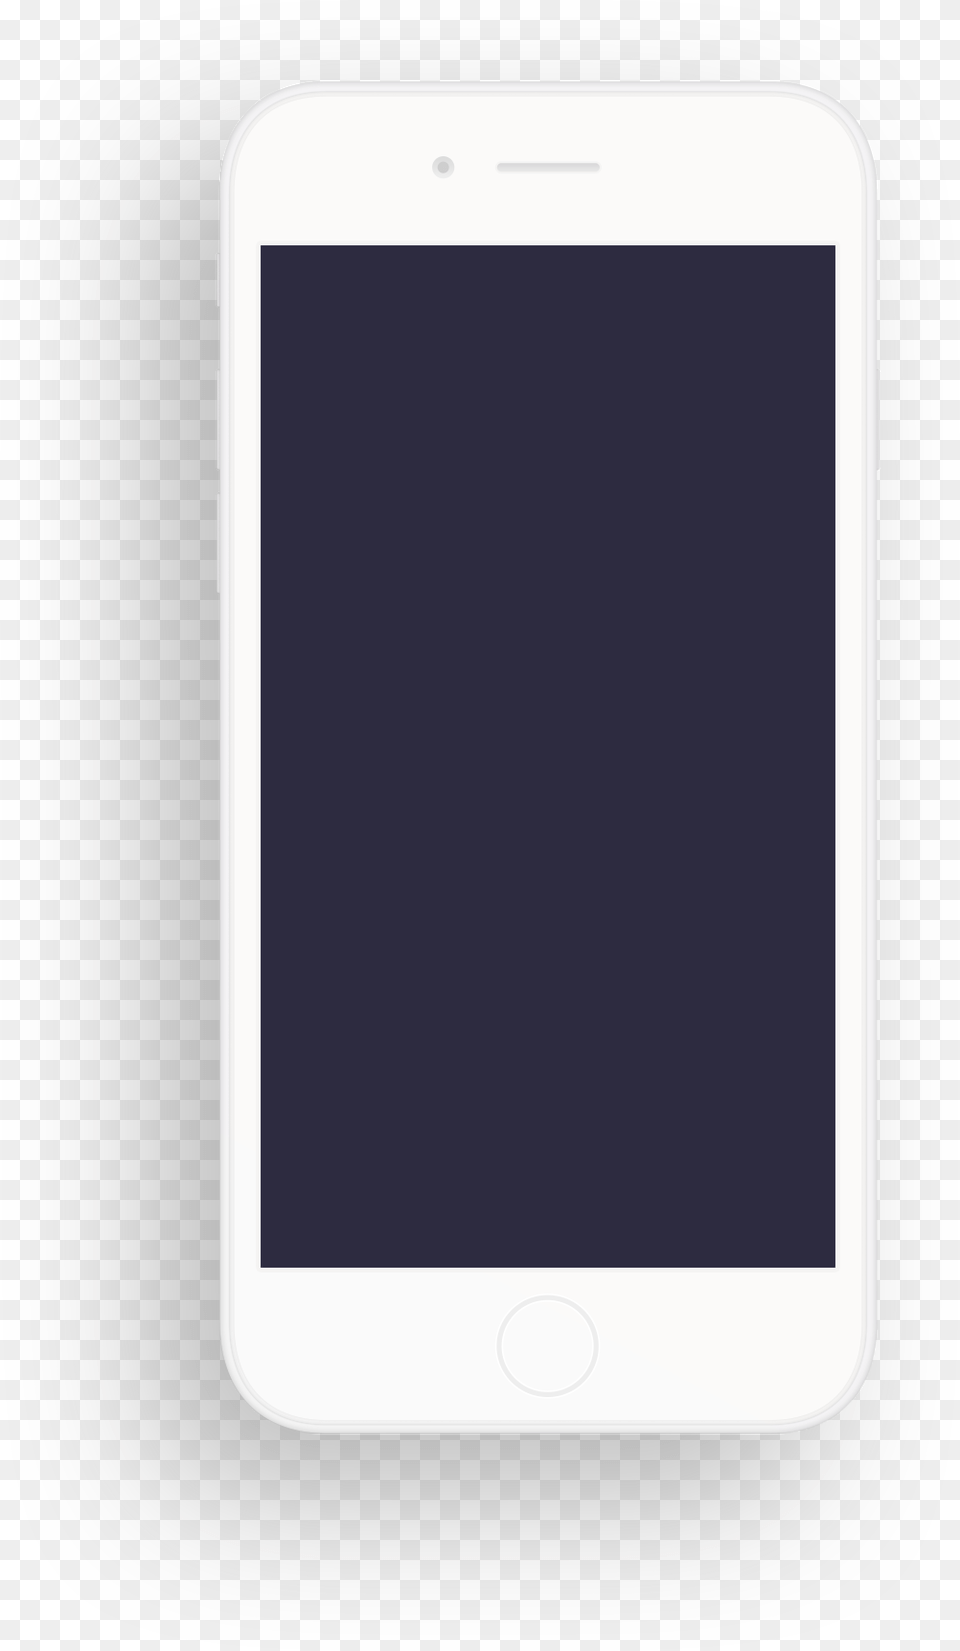 Mobile Phone Outline Smartphone, Electronics, Mobile Phone, Iphone Png Image